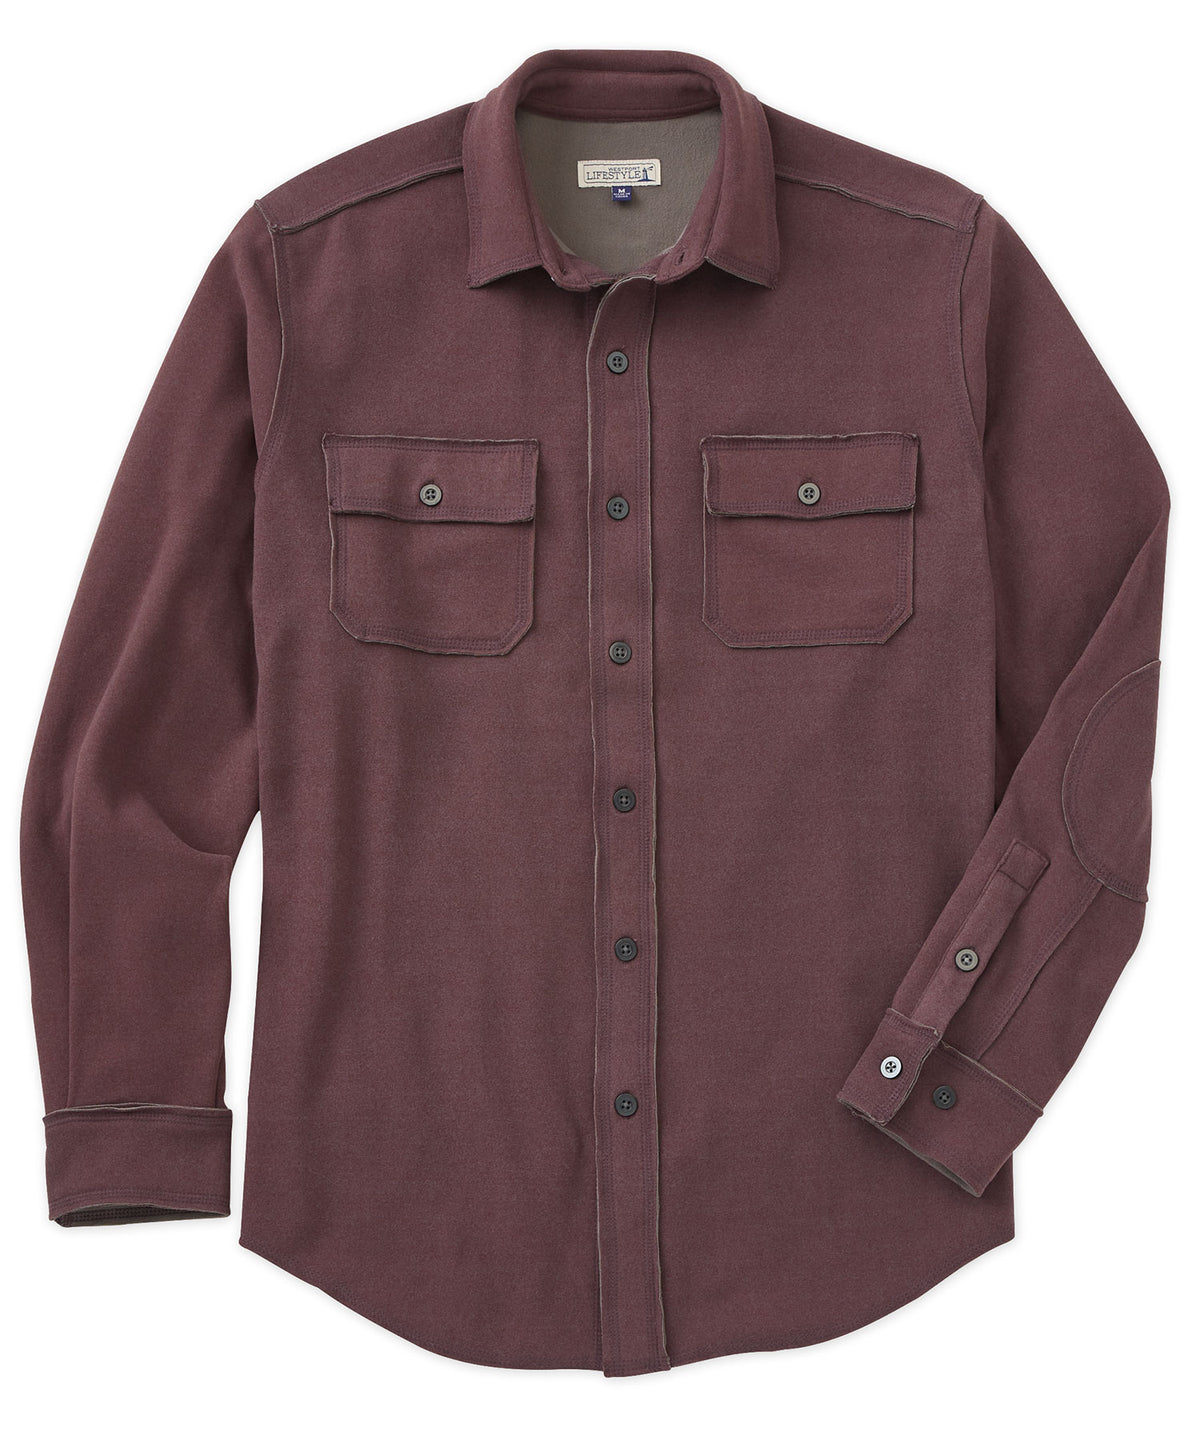 Westport Lifestyle Double Faced Performance Rough Edge Shirt Jacket, Big & Tall